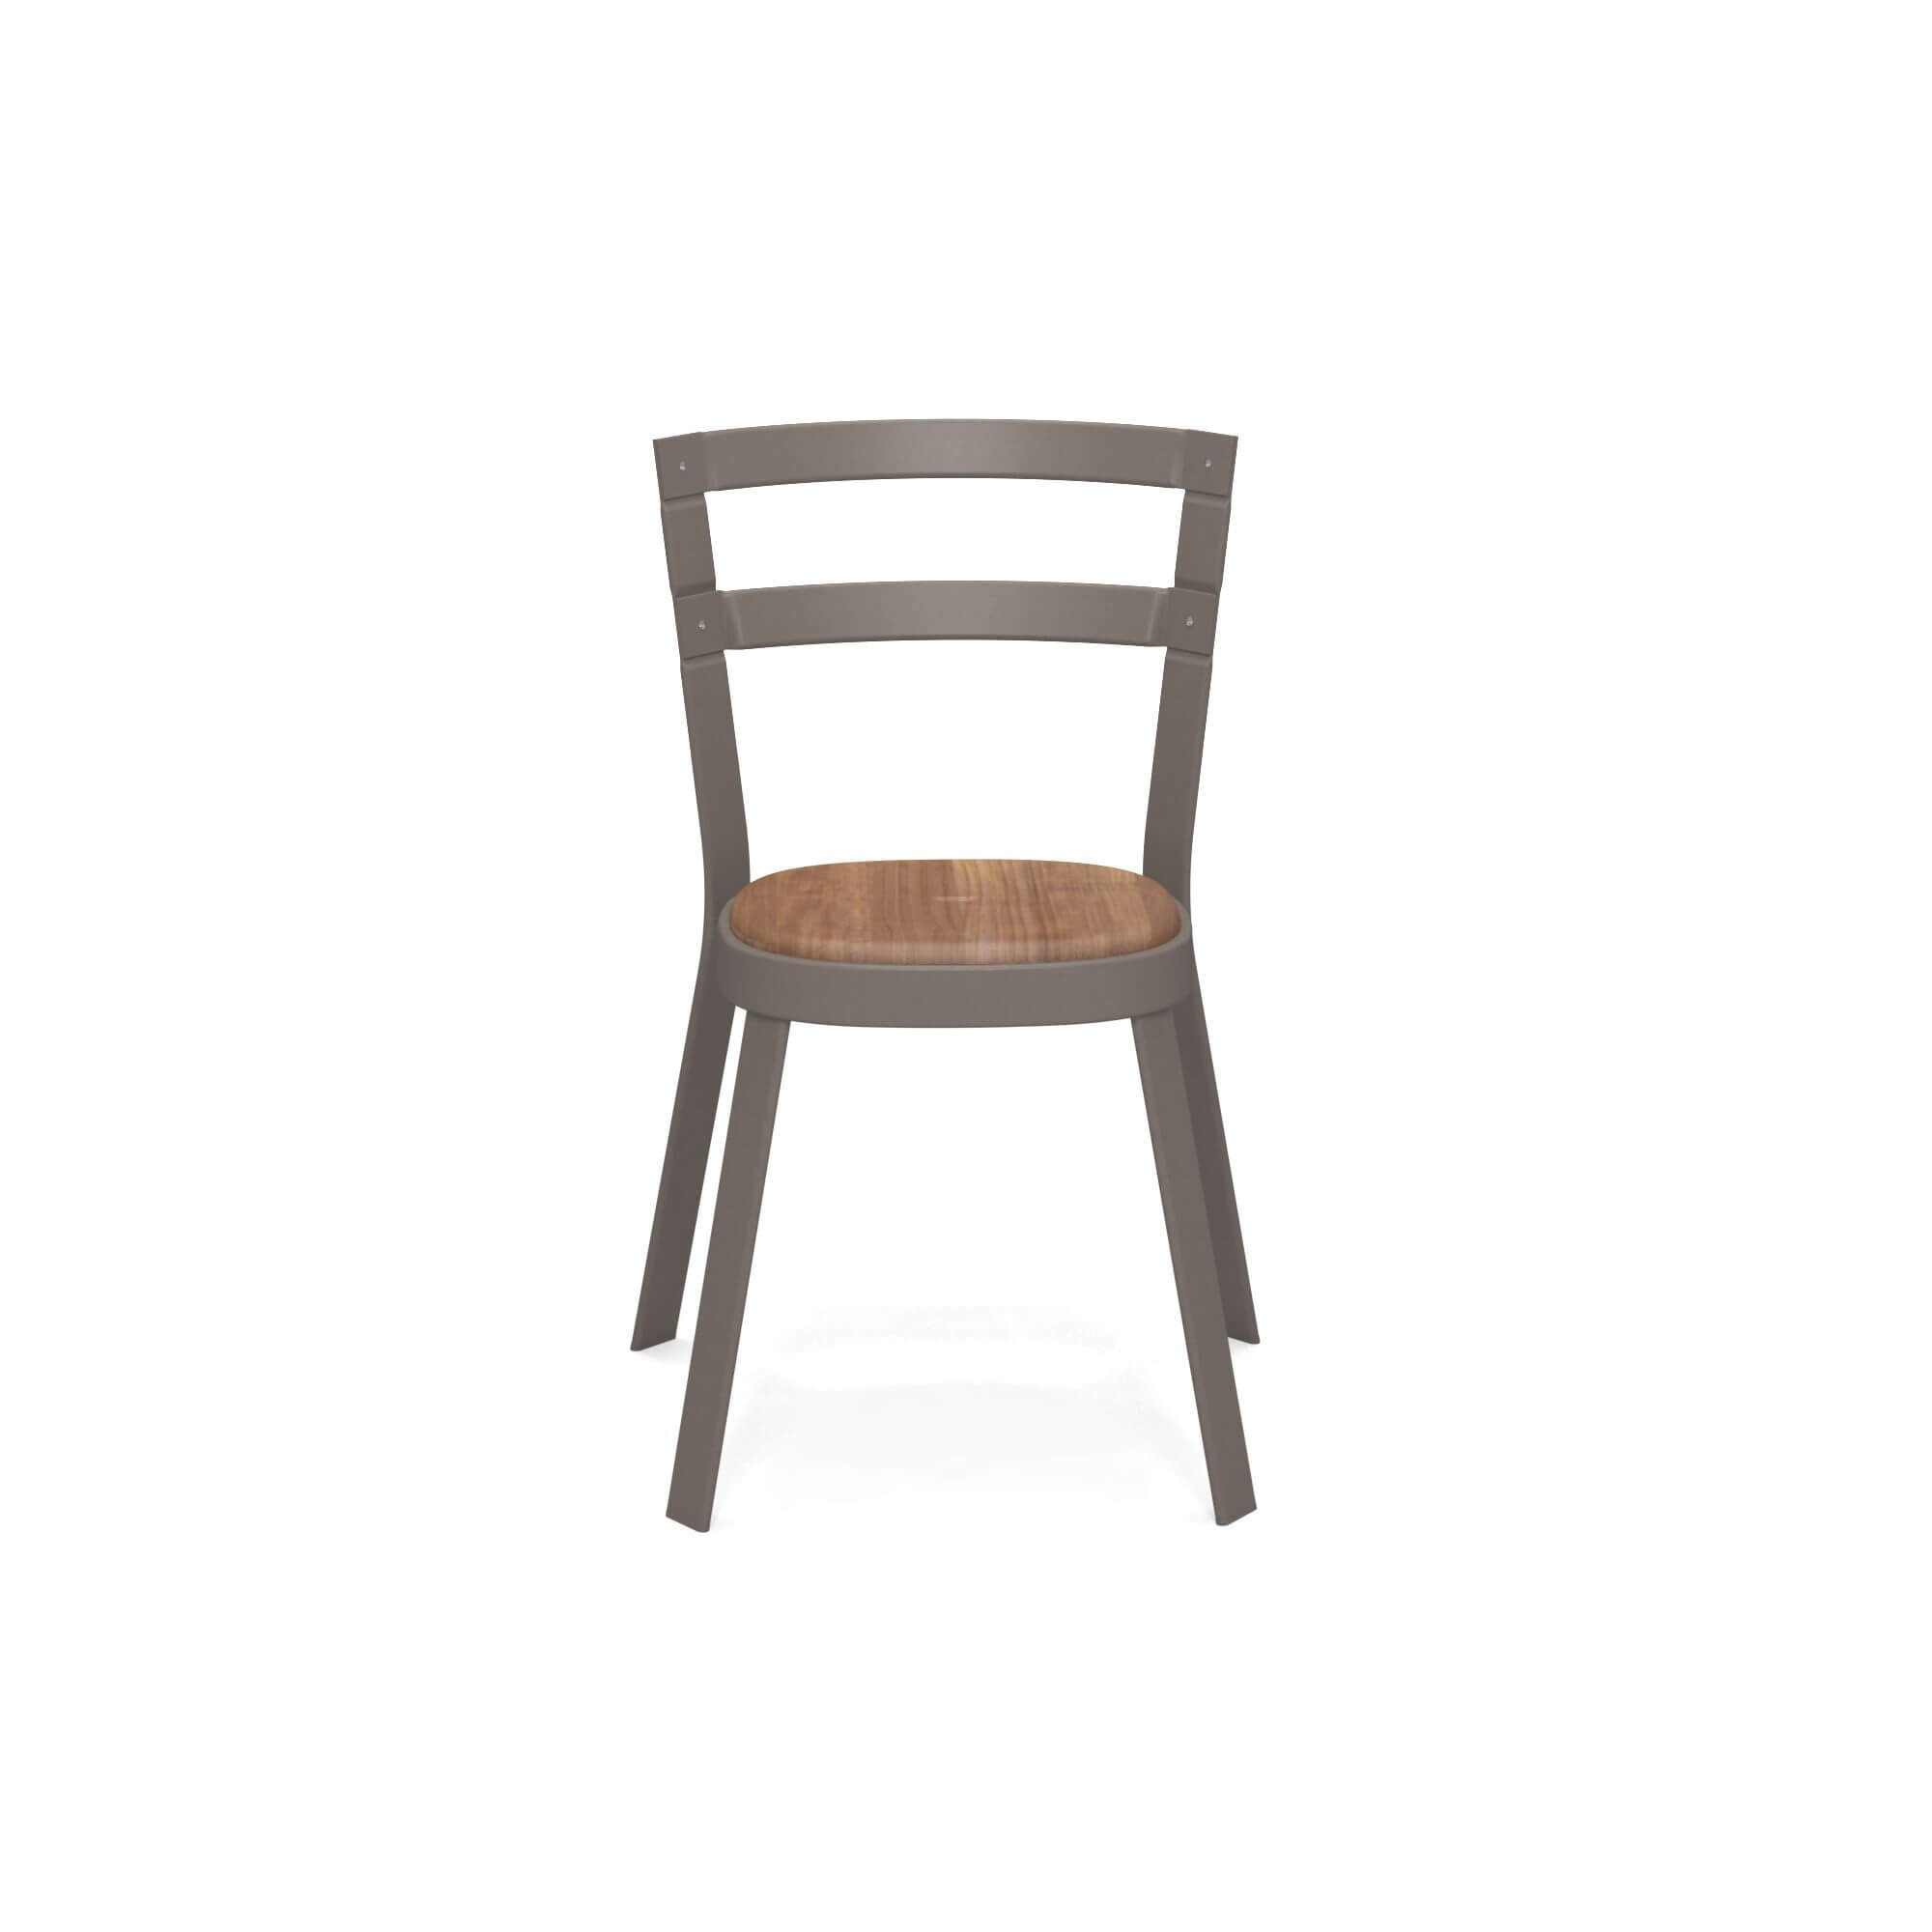 Thor 655 Chair from Emu, designed by Chiaramonte and Marin